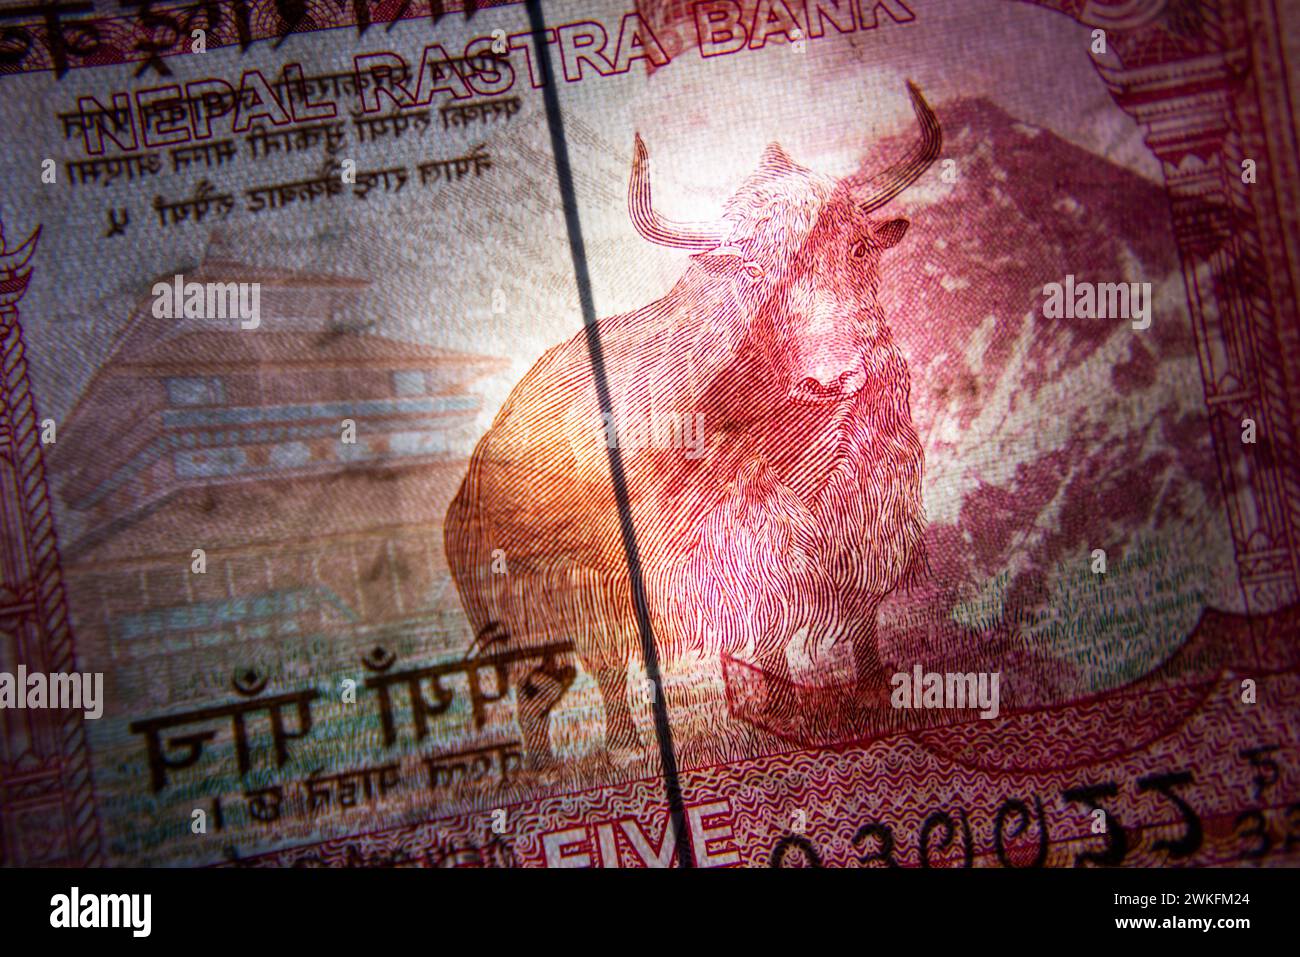 Indian currency notes with an oxen's image Stock Photo